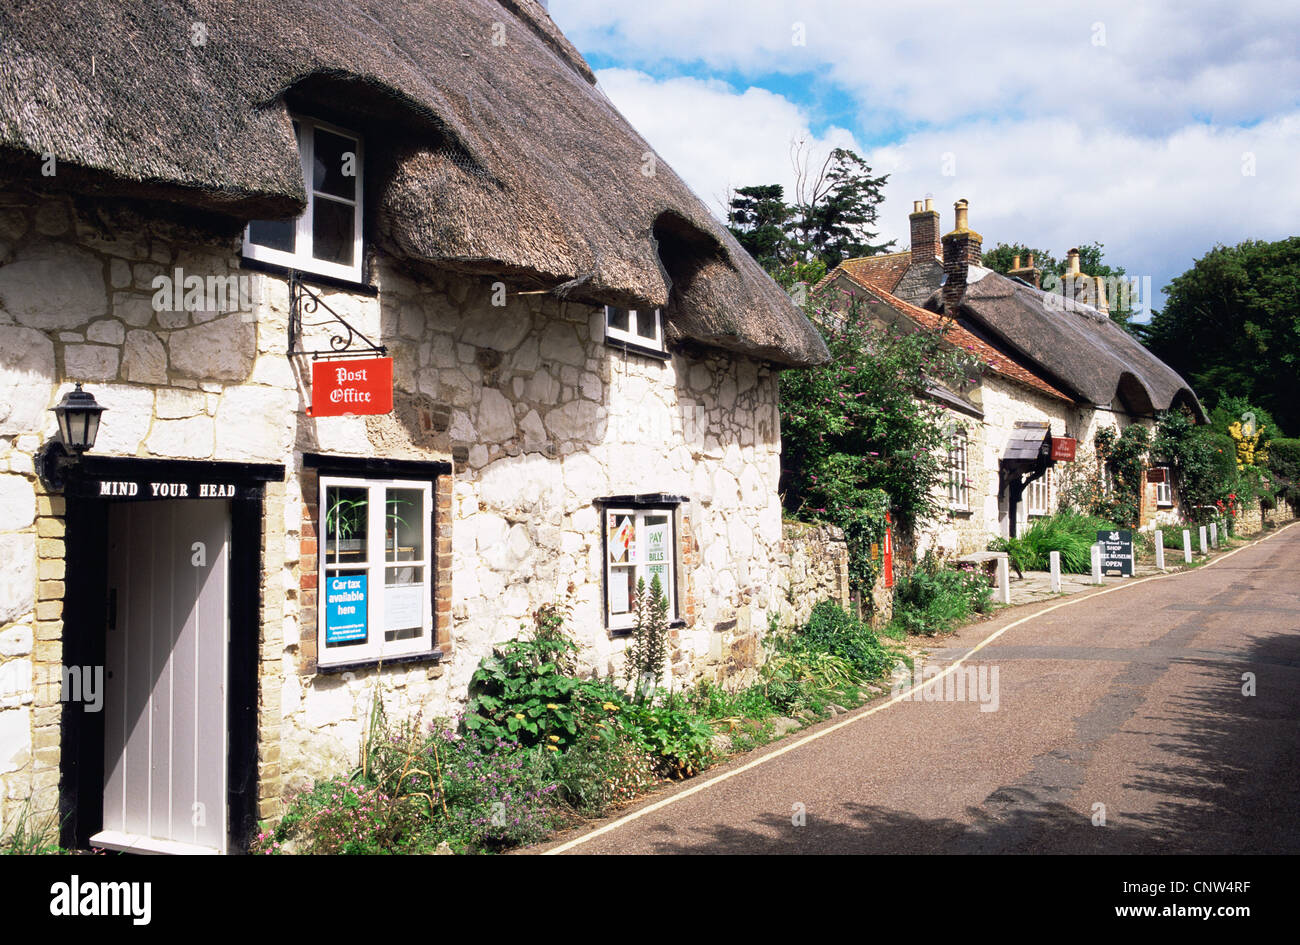 United Kingdom, Great Britain, England, Hampshire, Isle of Wight, Thatched Cottages in Brighstone Village Stock Photo